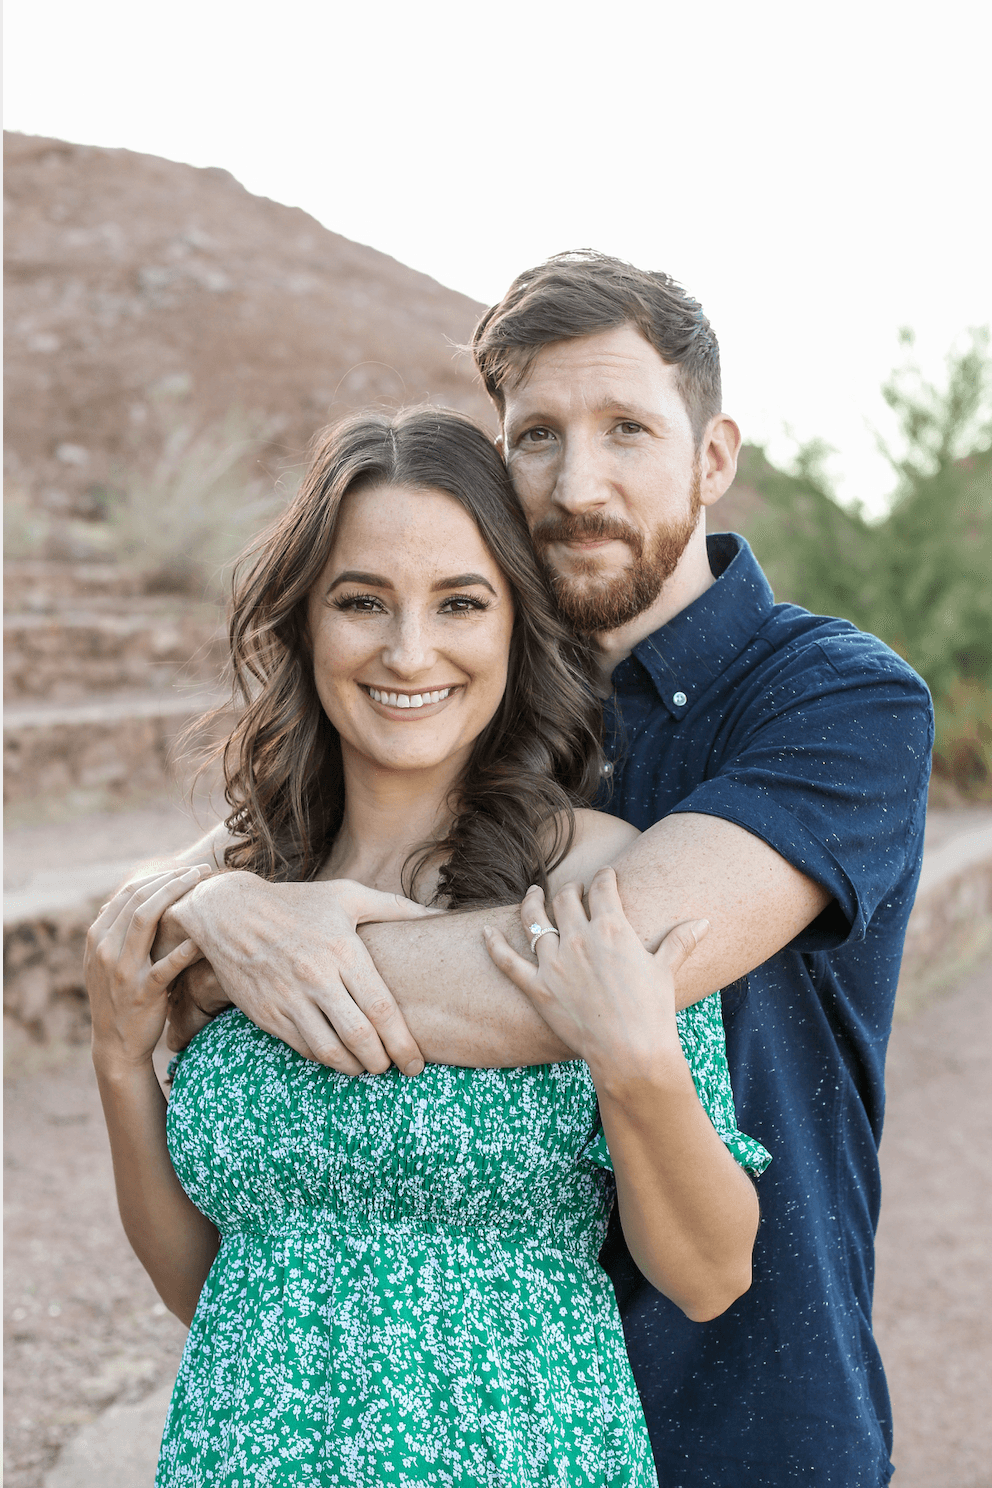 Katie Bock and Scott Davis of Arizona postponed their wedding until later this year as a result of the COVID-19 pandemic. 